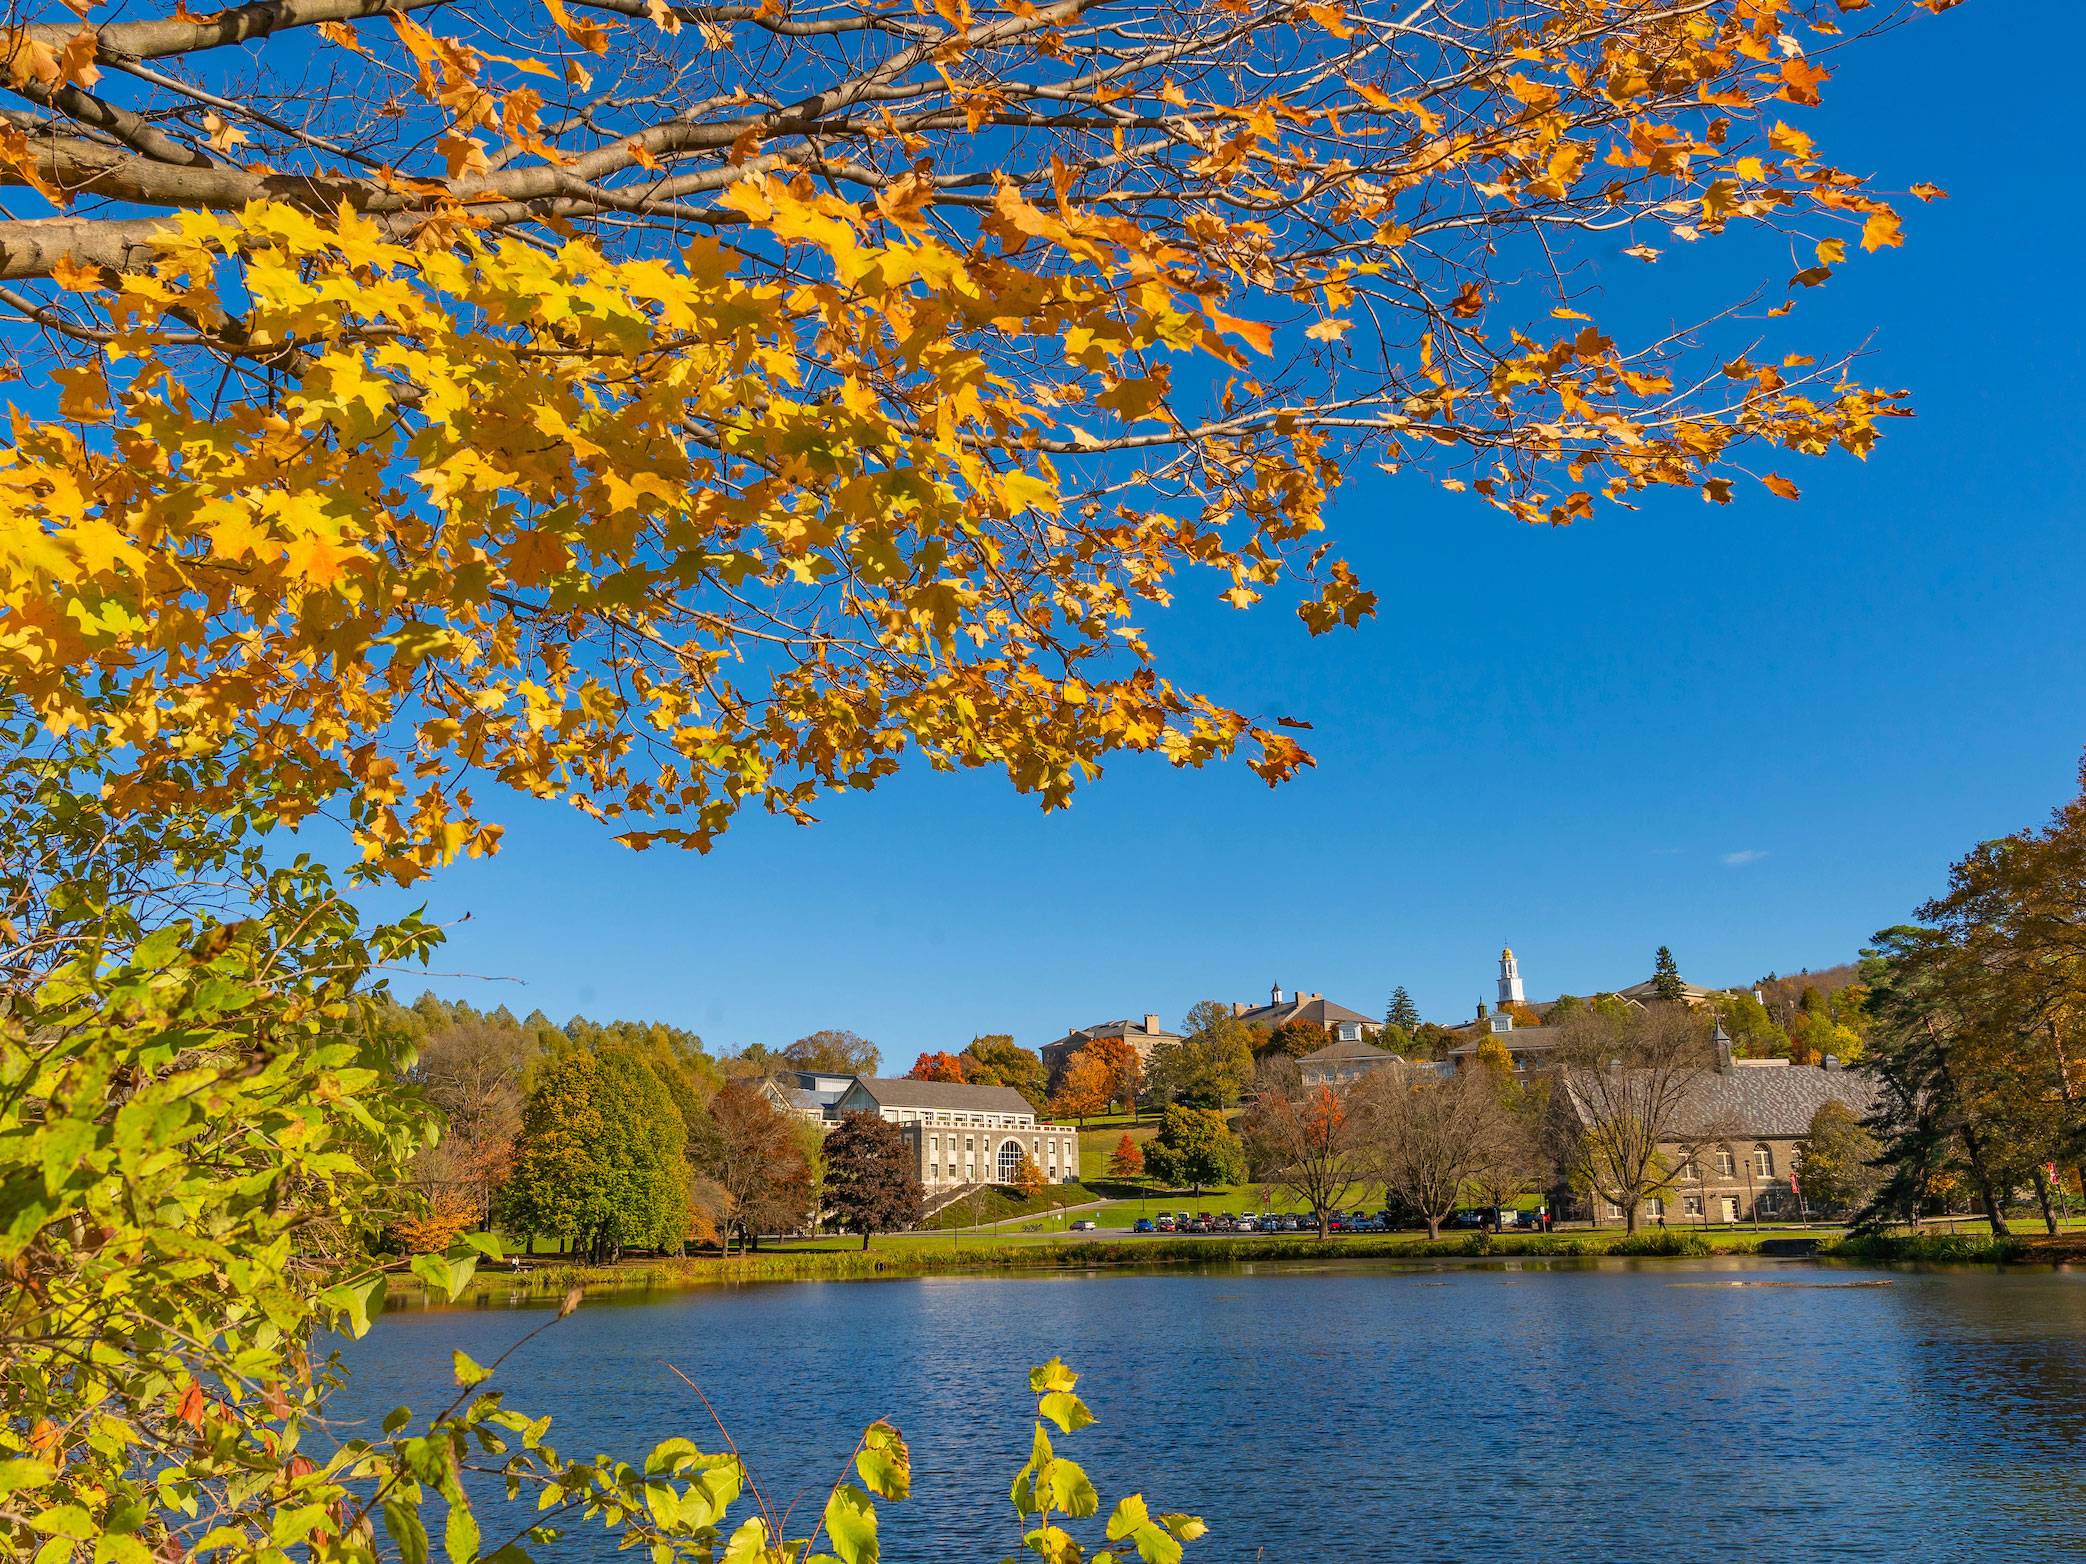 View of campus hill from across Taylor Lake, autumn foliage in top left foreground